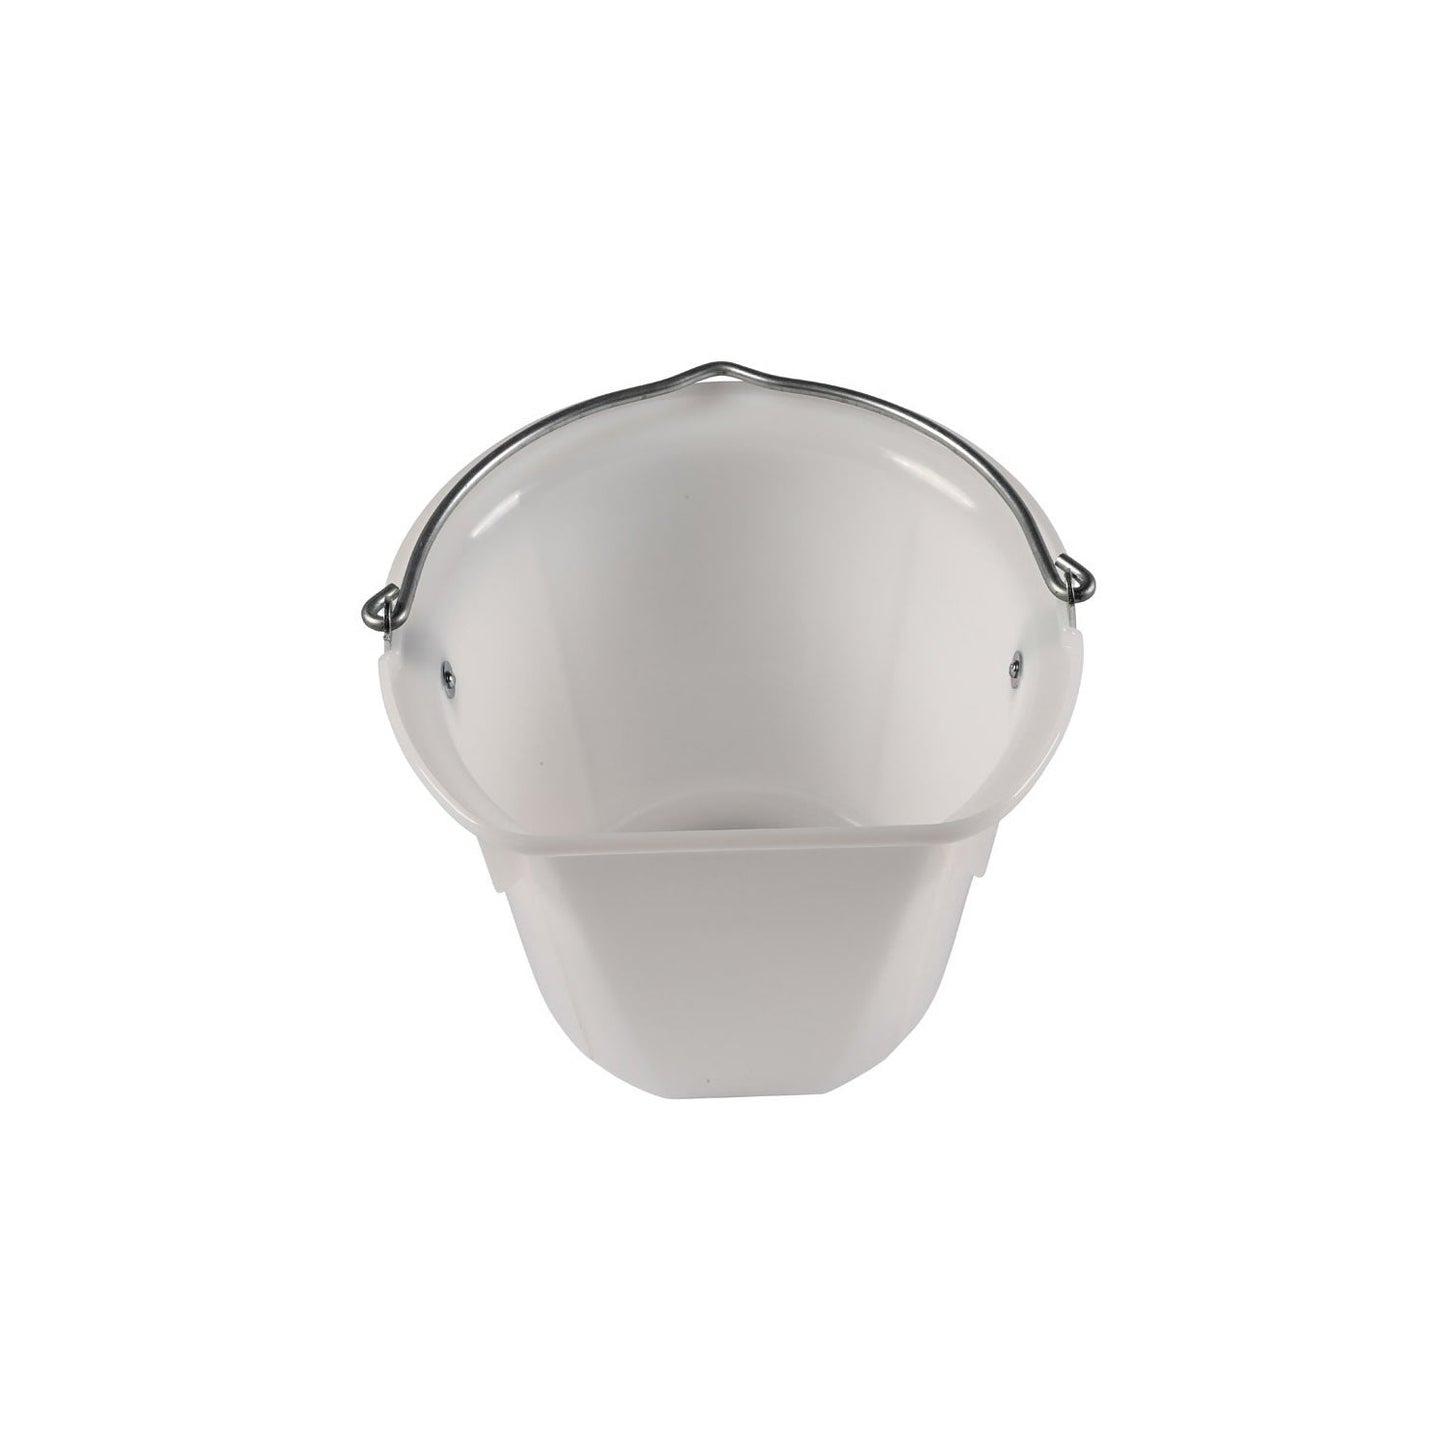 Stubbs Hanging Bucket Flat Sided Large S85A - 18 Litre